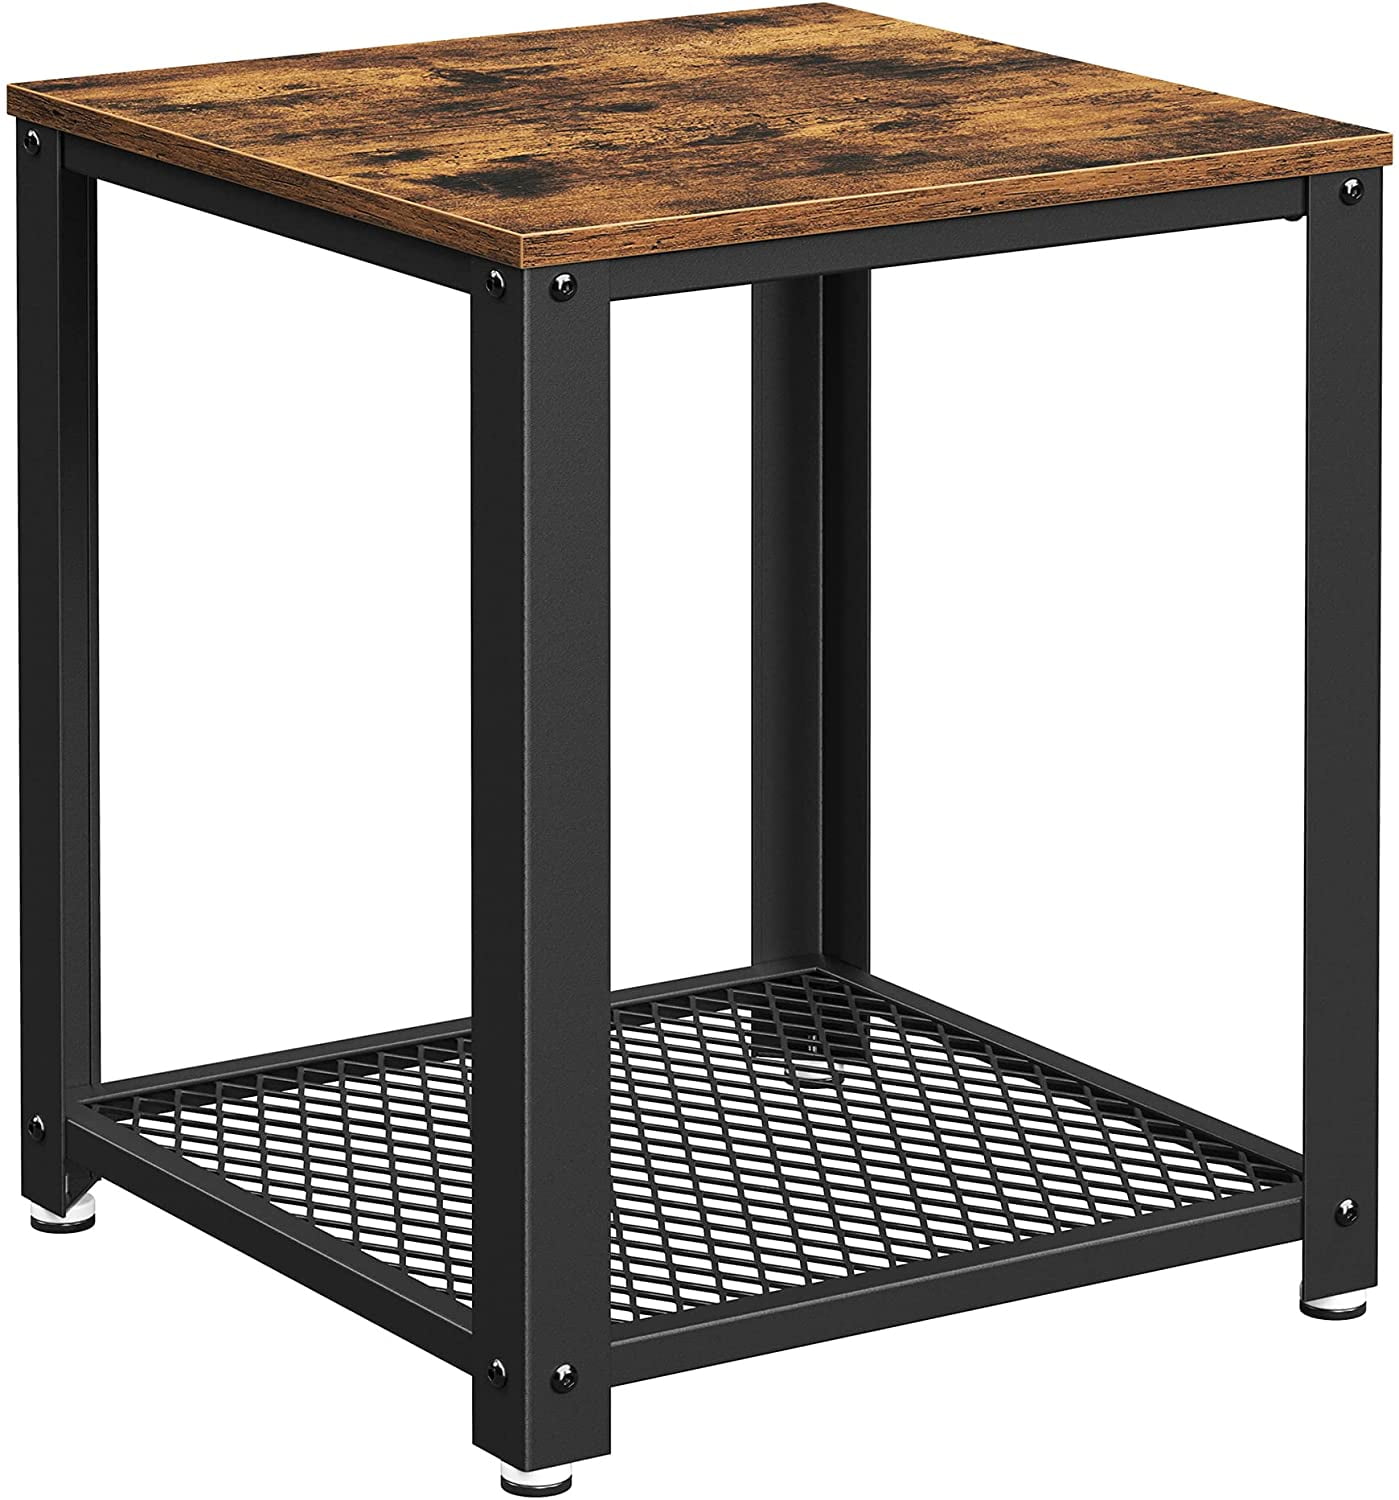 Study Square Side Table Rustic Brown and Black LET270B01 VASAGLE End Table Steel Frame Bedroom Night Table for Living Room Industrial